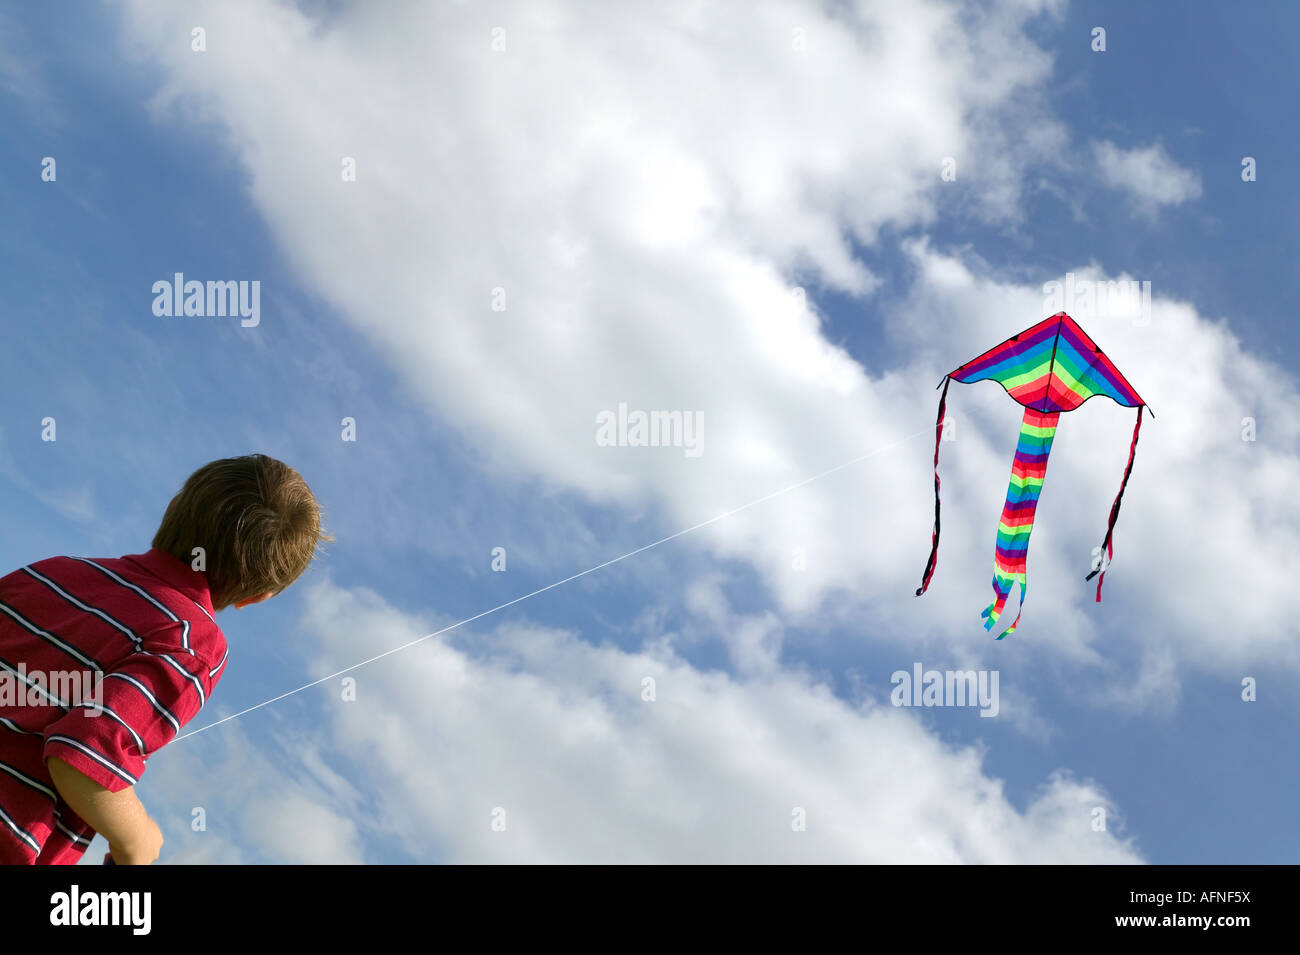 Young boy flying his kite on a bright summers day Stock Photo